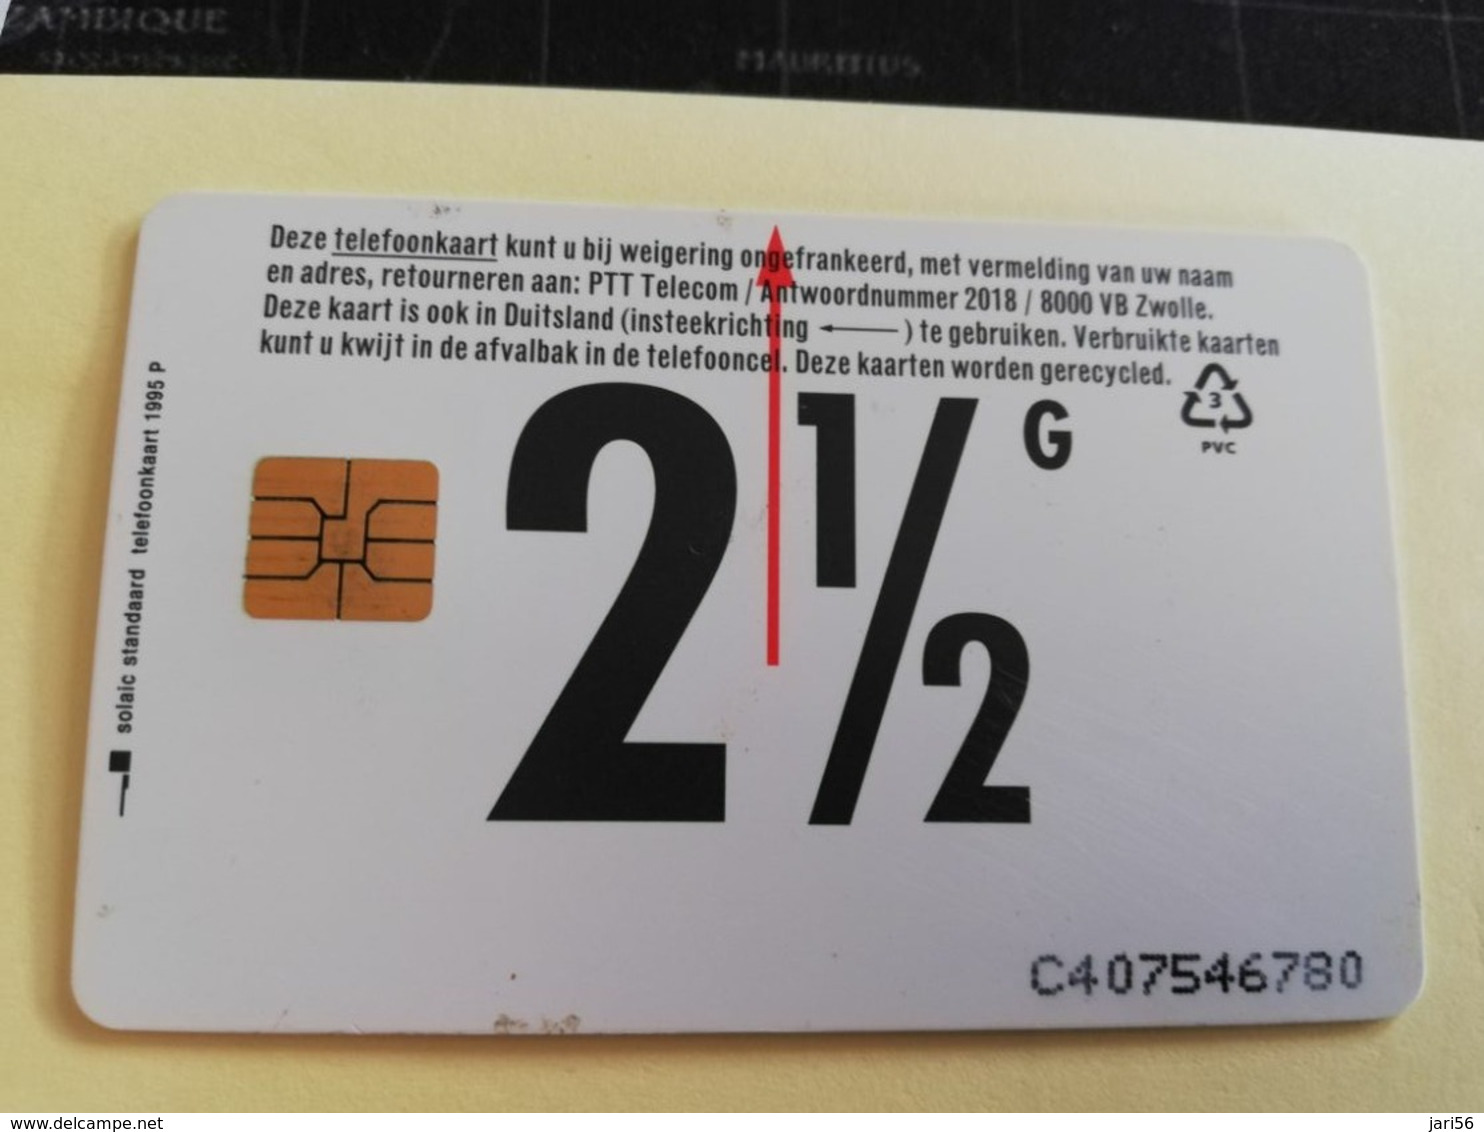 NETHERLANDS  ADVERTISING CHIPCARD HFL 2,50 CRE 293 ALMELO SEA MILES CLUBCARD          Fine Used   ** 3186** - Private